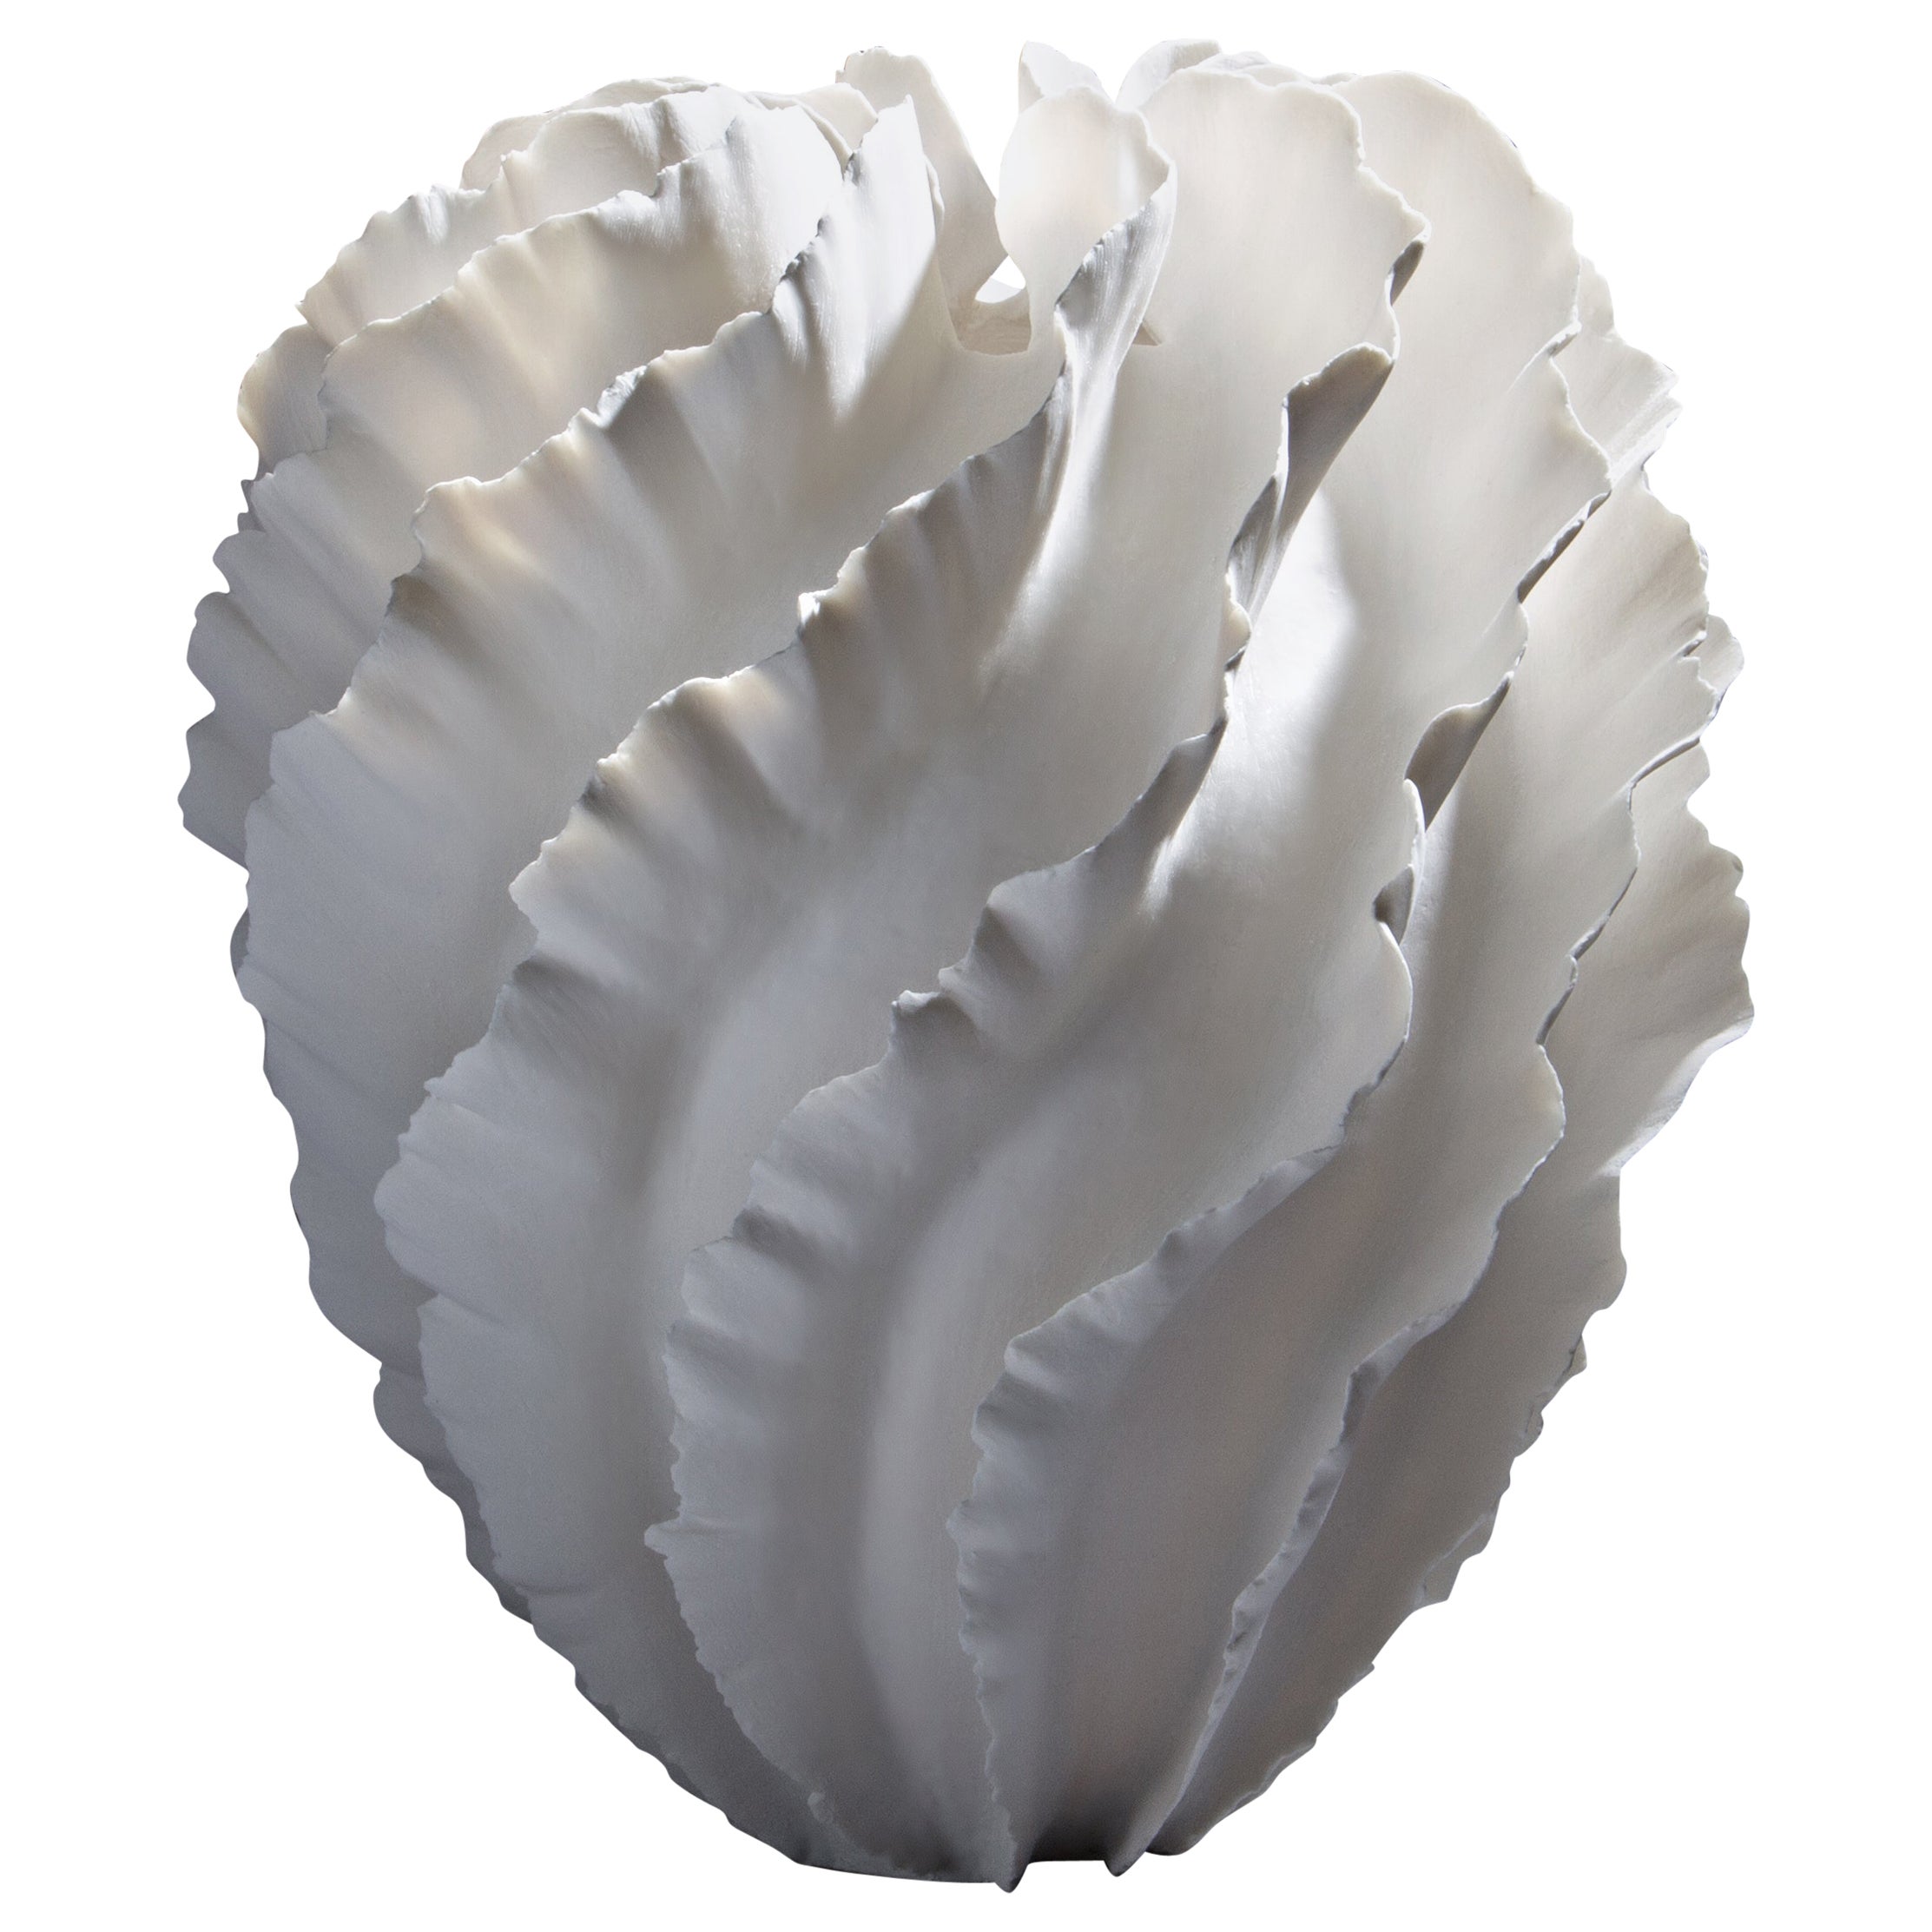 Rippling White Ruffled Abstract Sculpture, Sandra Davolio For Sale